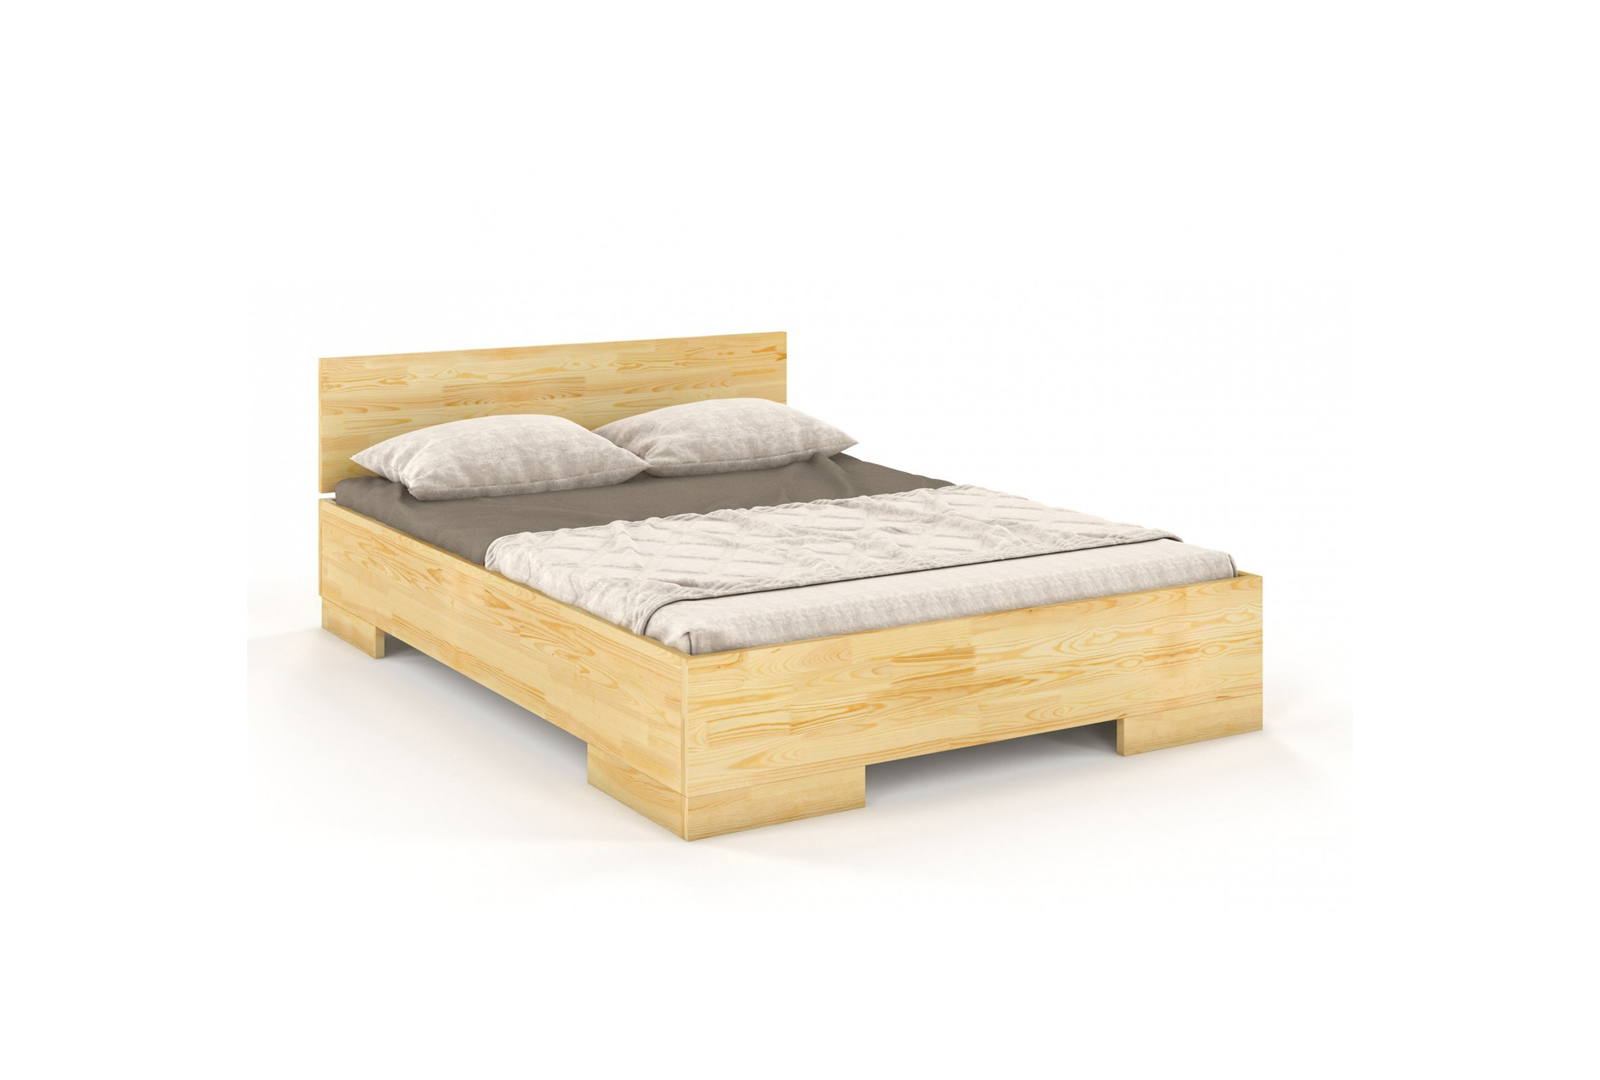 WOODEN PINE BED SKANDICA SPECTRUM MAXI AND LONG 1